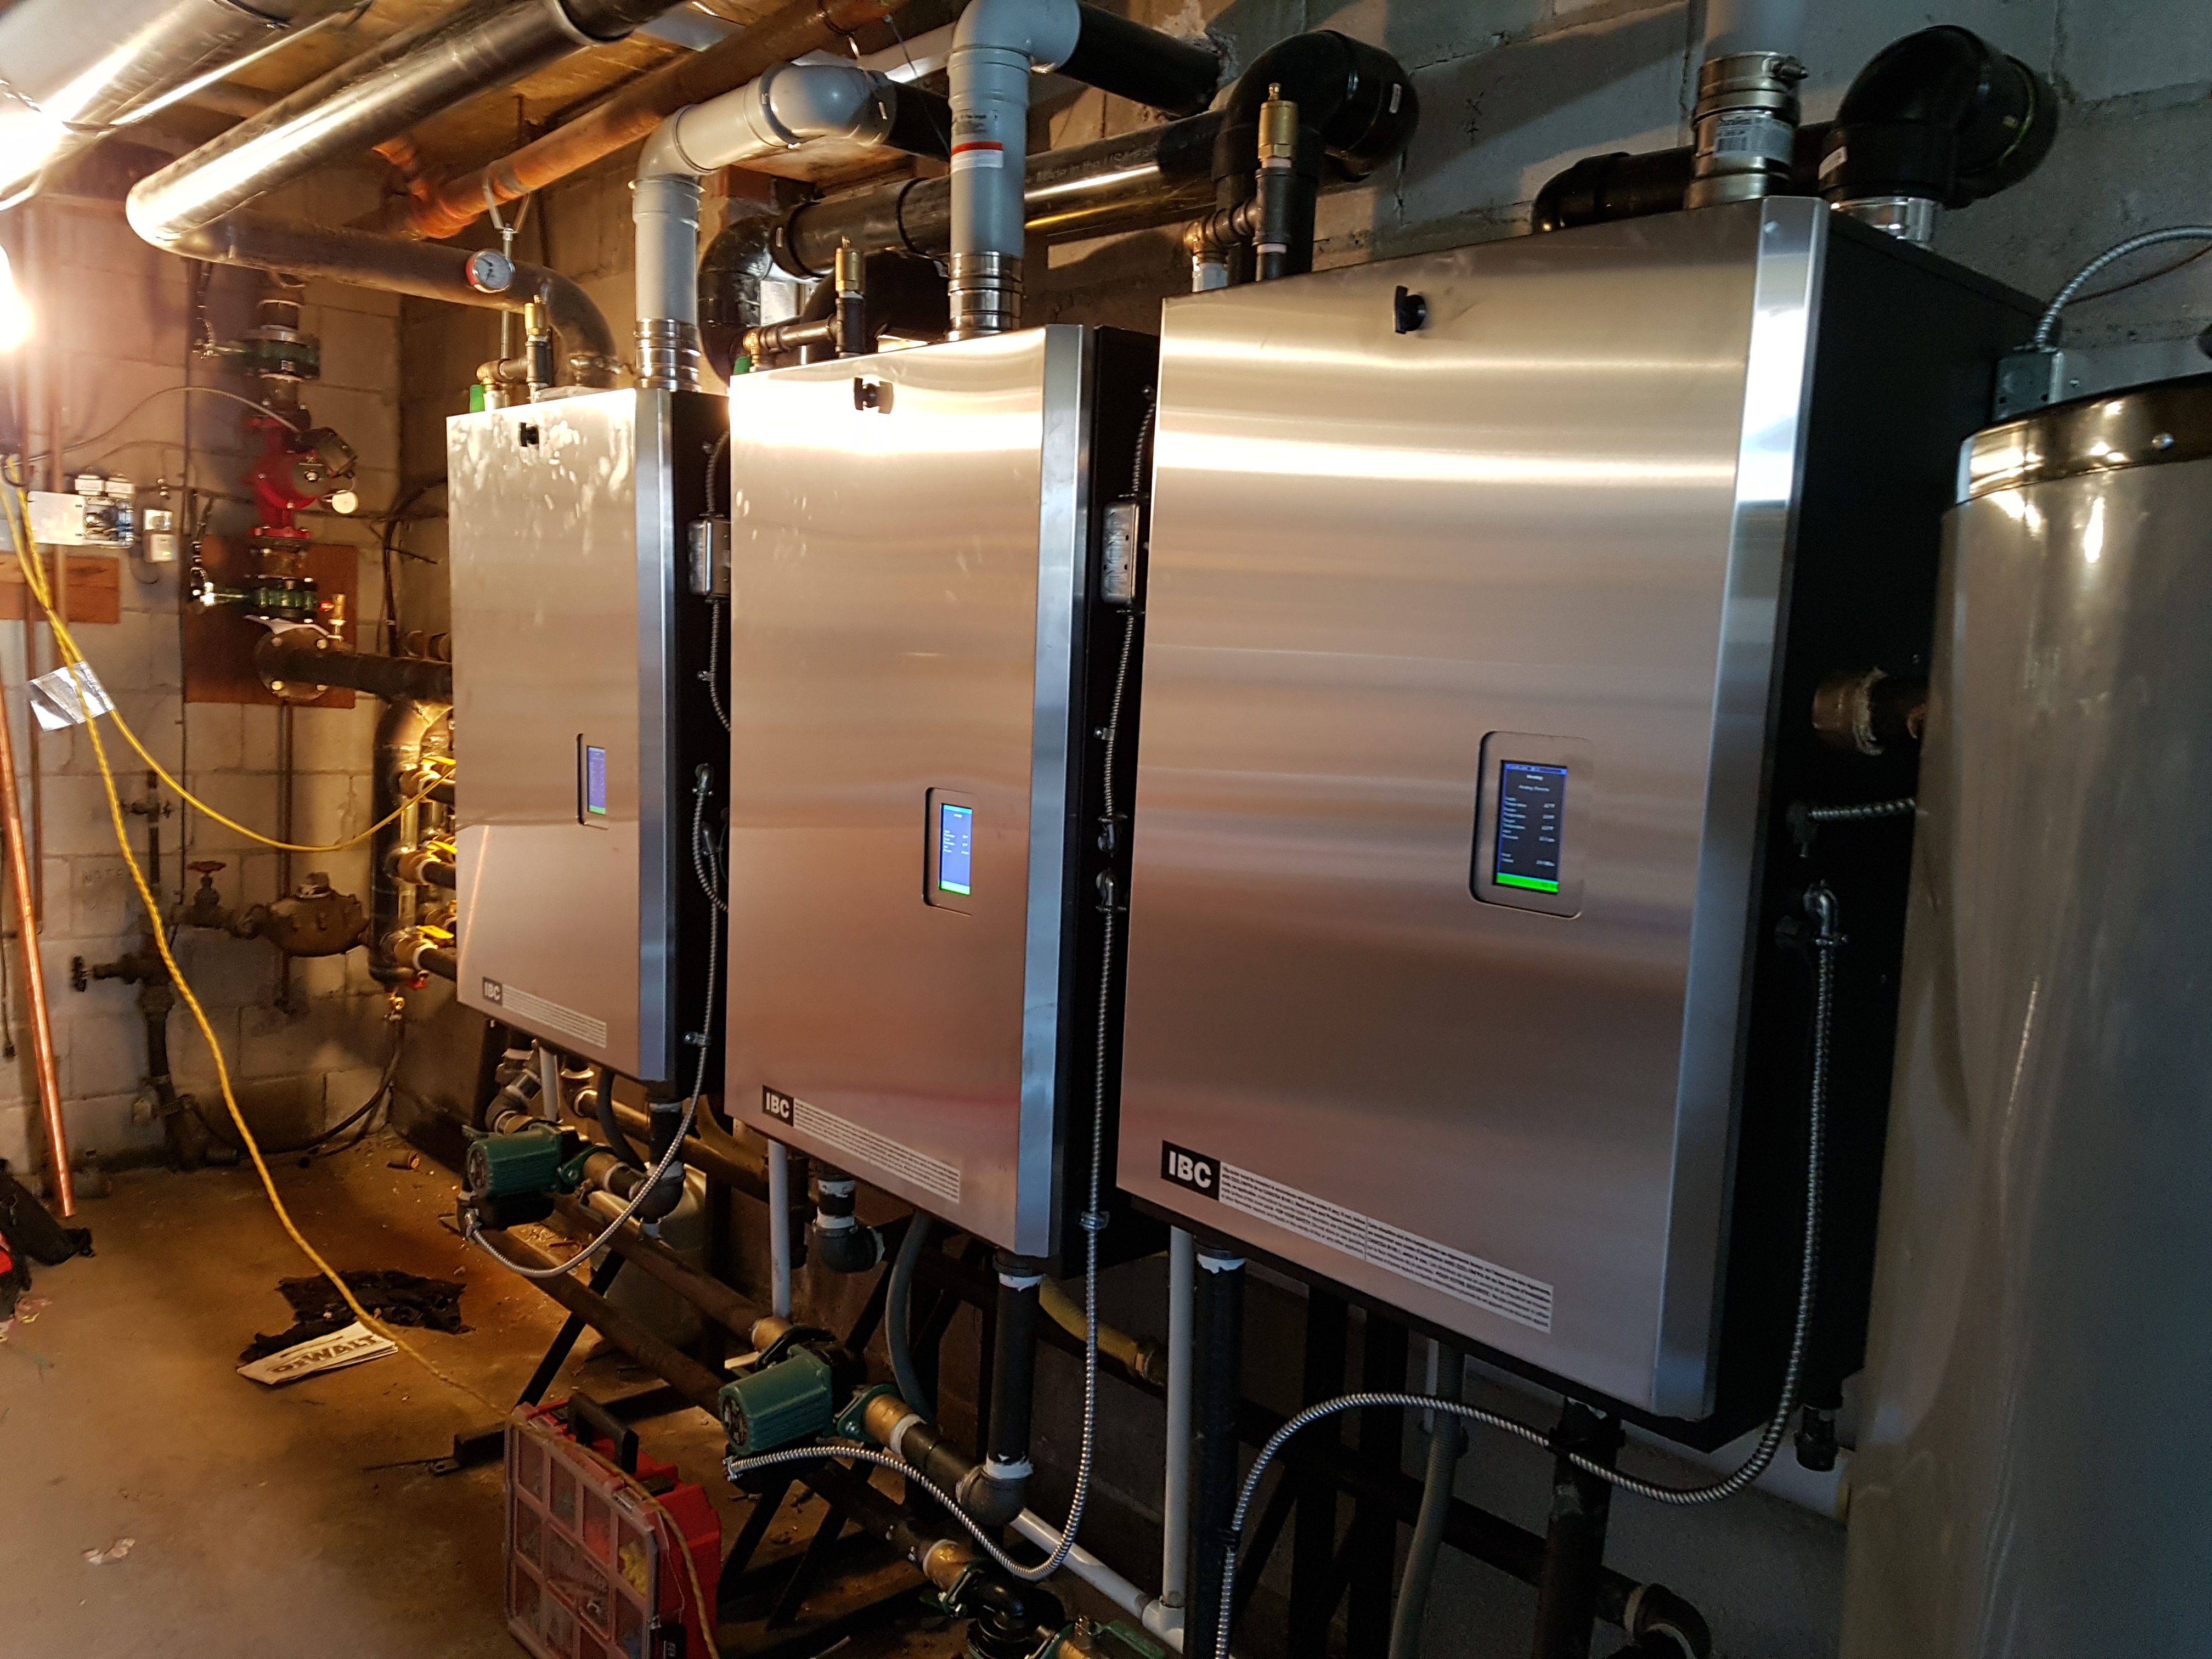 Four Seasons is now offering Solar hot water